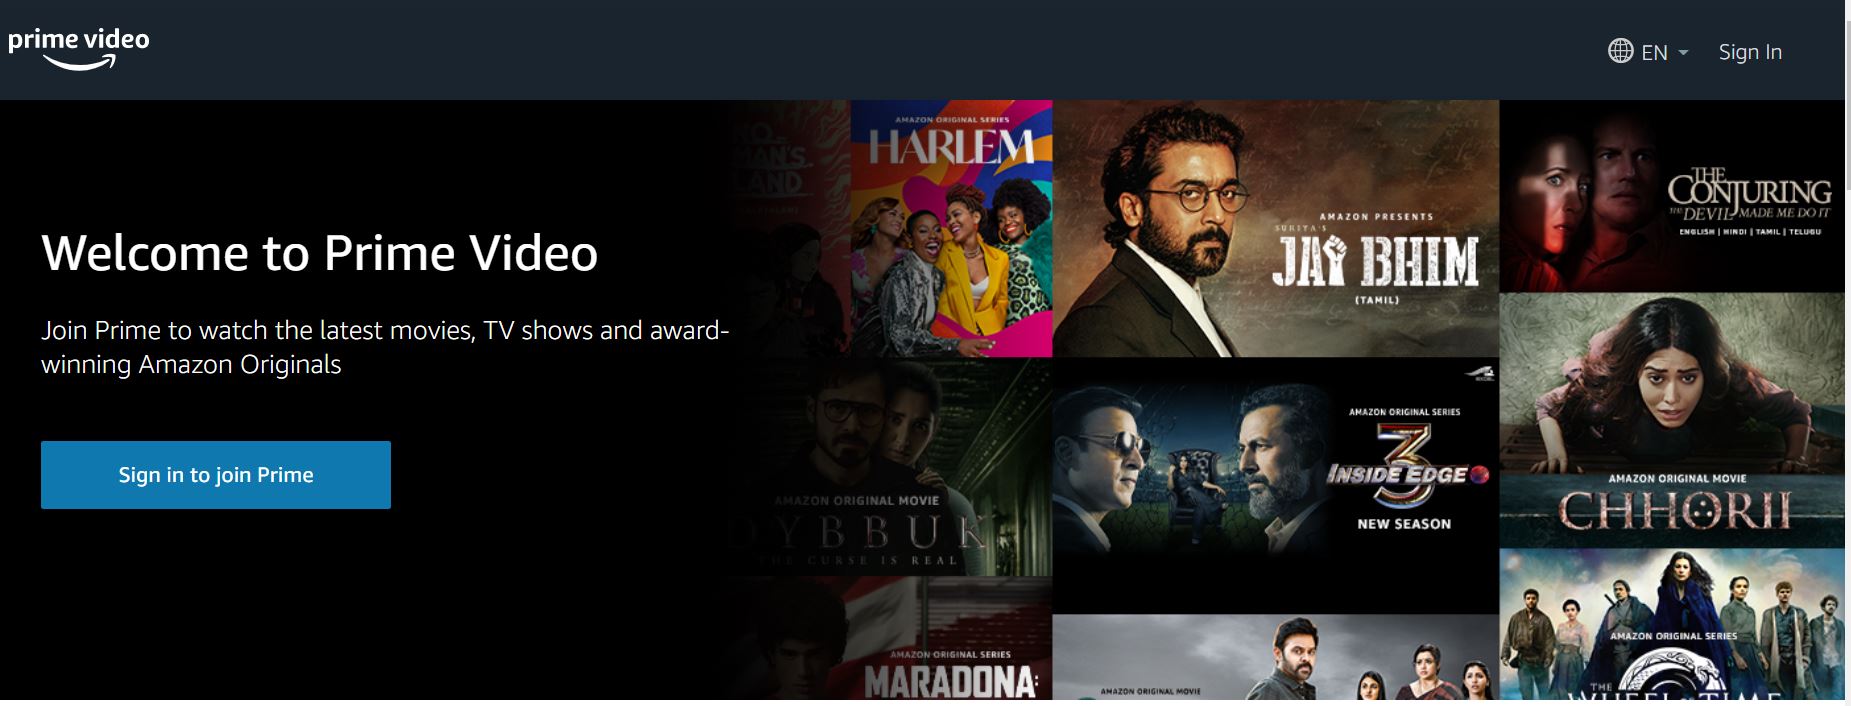 amazon prime video a couchtunner alternative